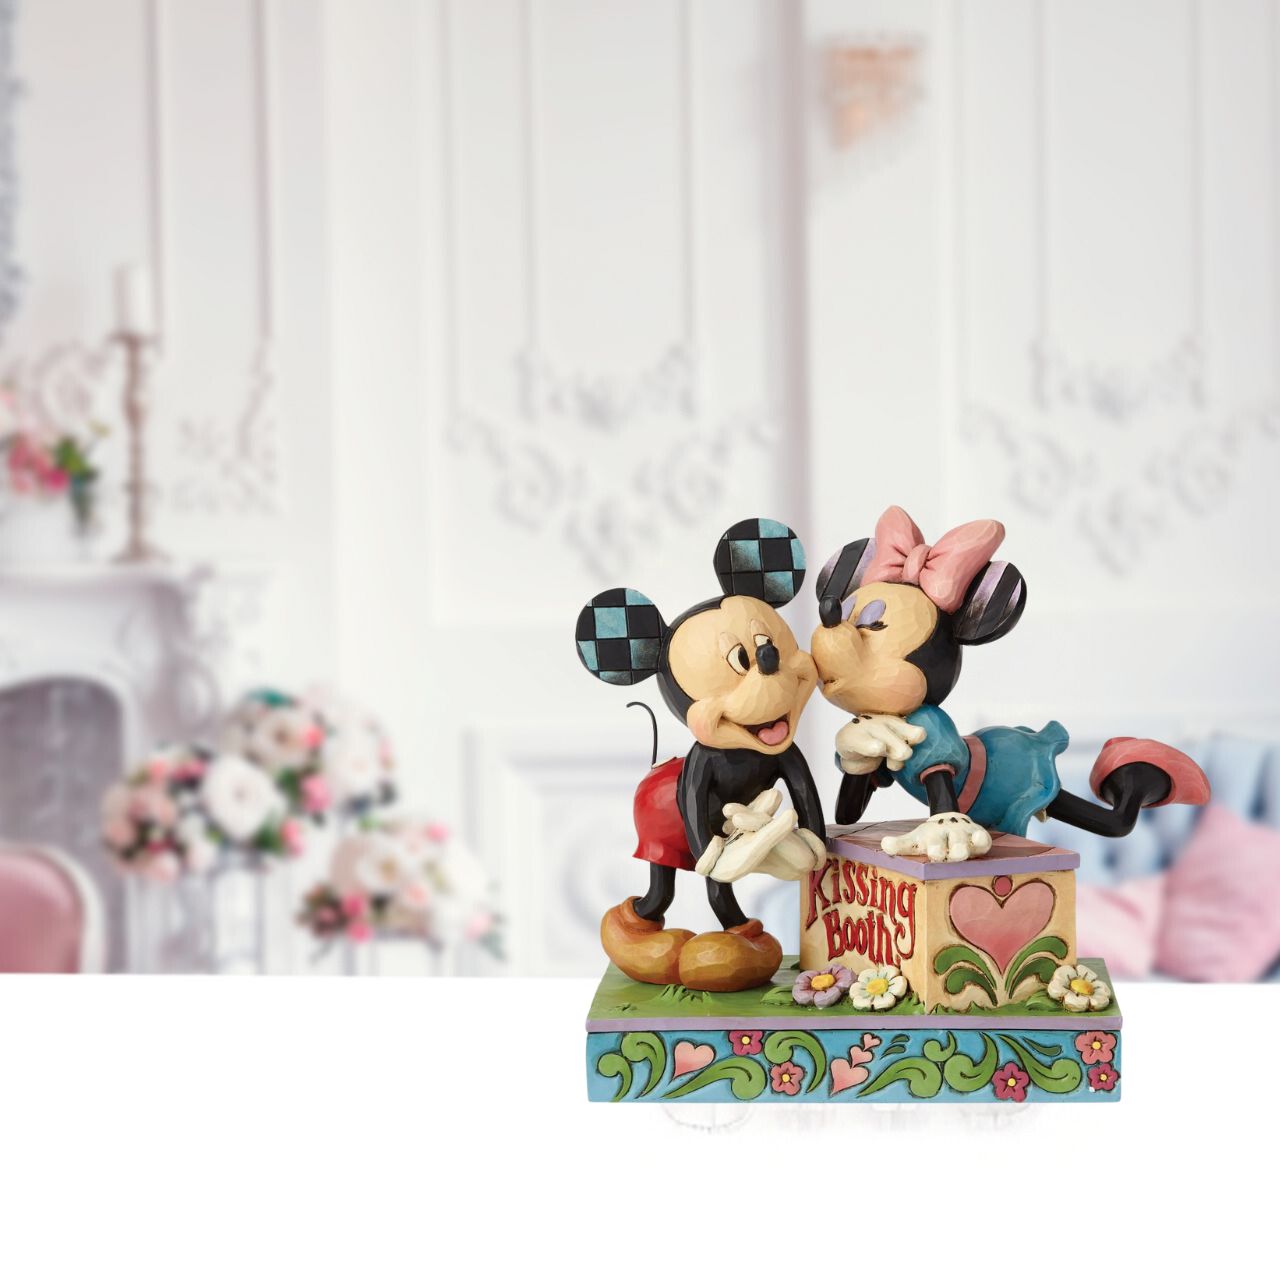 Minnie leans over a kissing booth to plant a smooch on one very smitten Mickey in this cheeky scene by Jim Shore. Handcrafted in his unique folk art style, the cast stone design features whimsical rosemaling and quilt patterns.